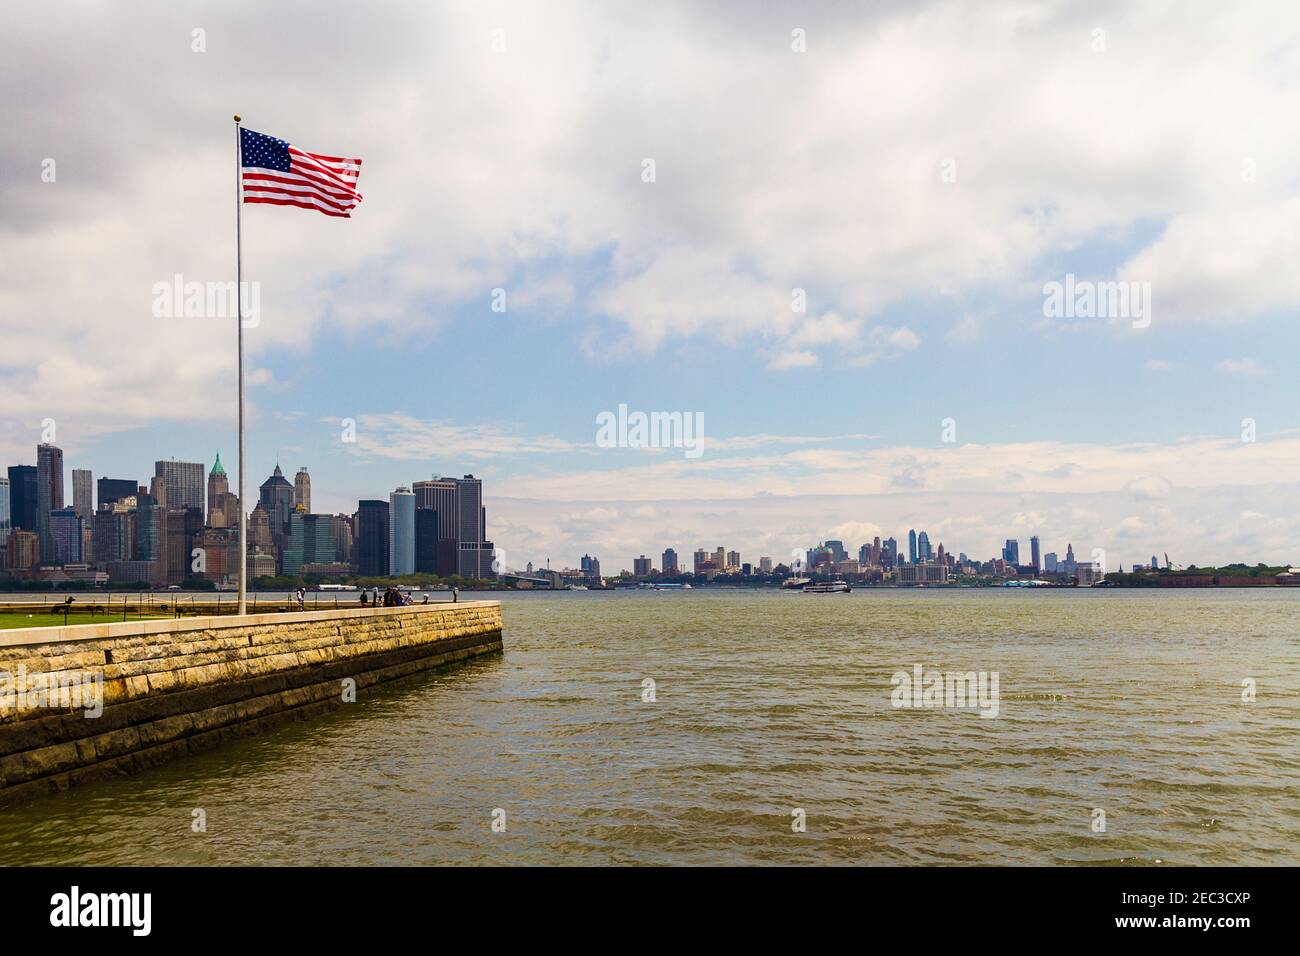 An American flag and Manhattan cityscape in the background Stock Photo